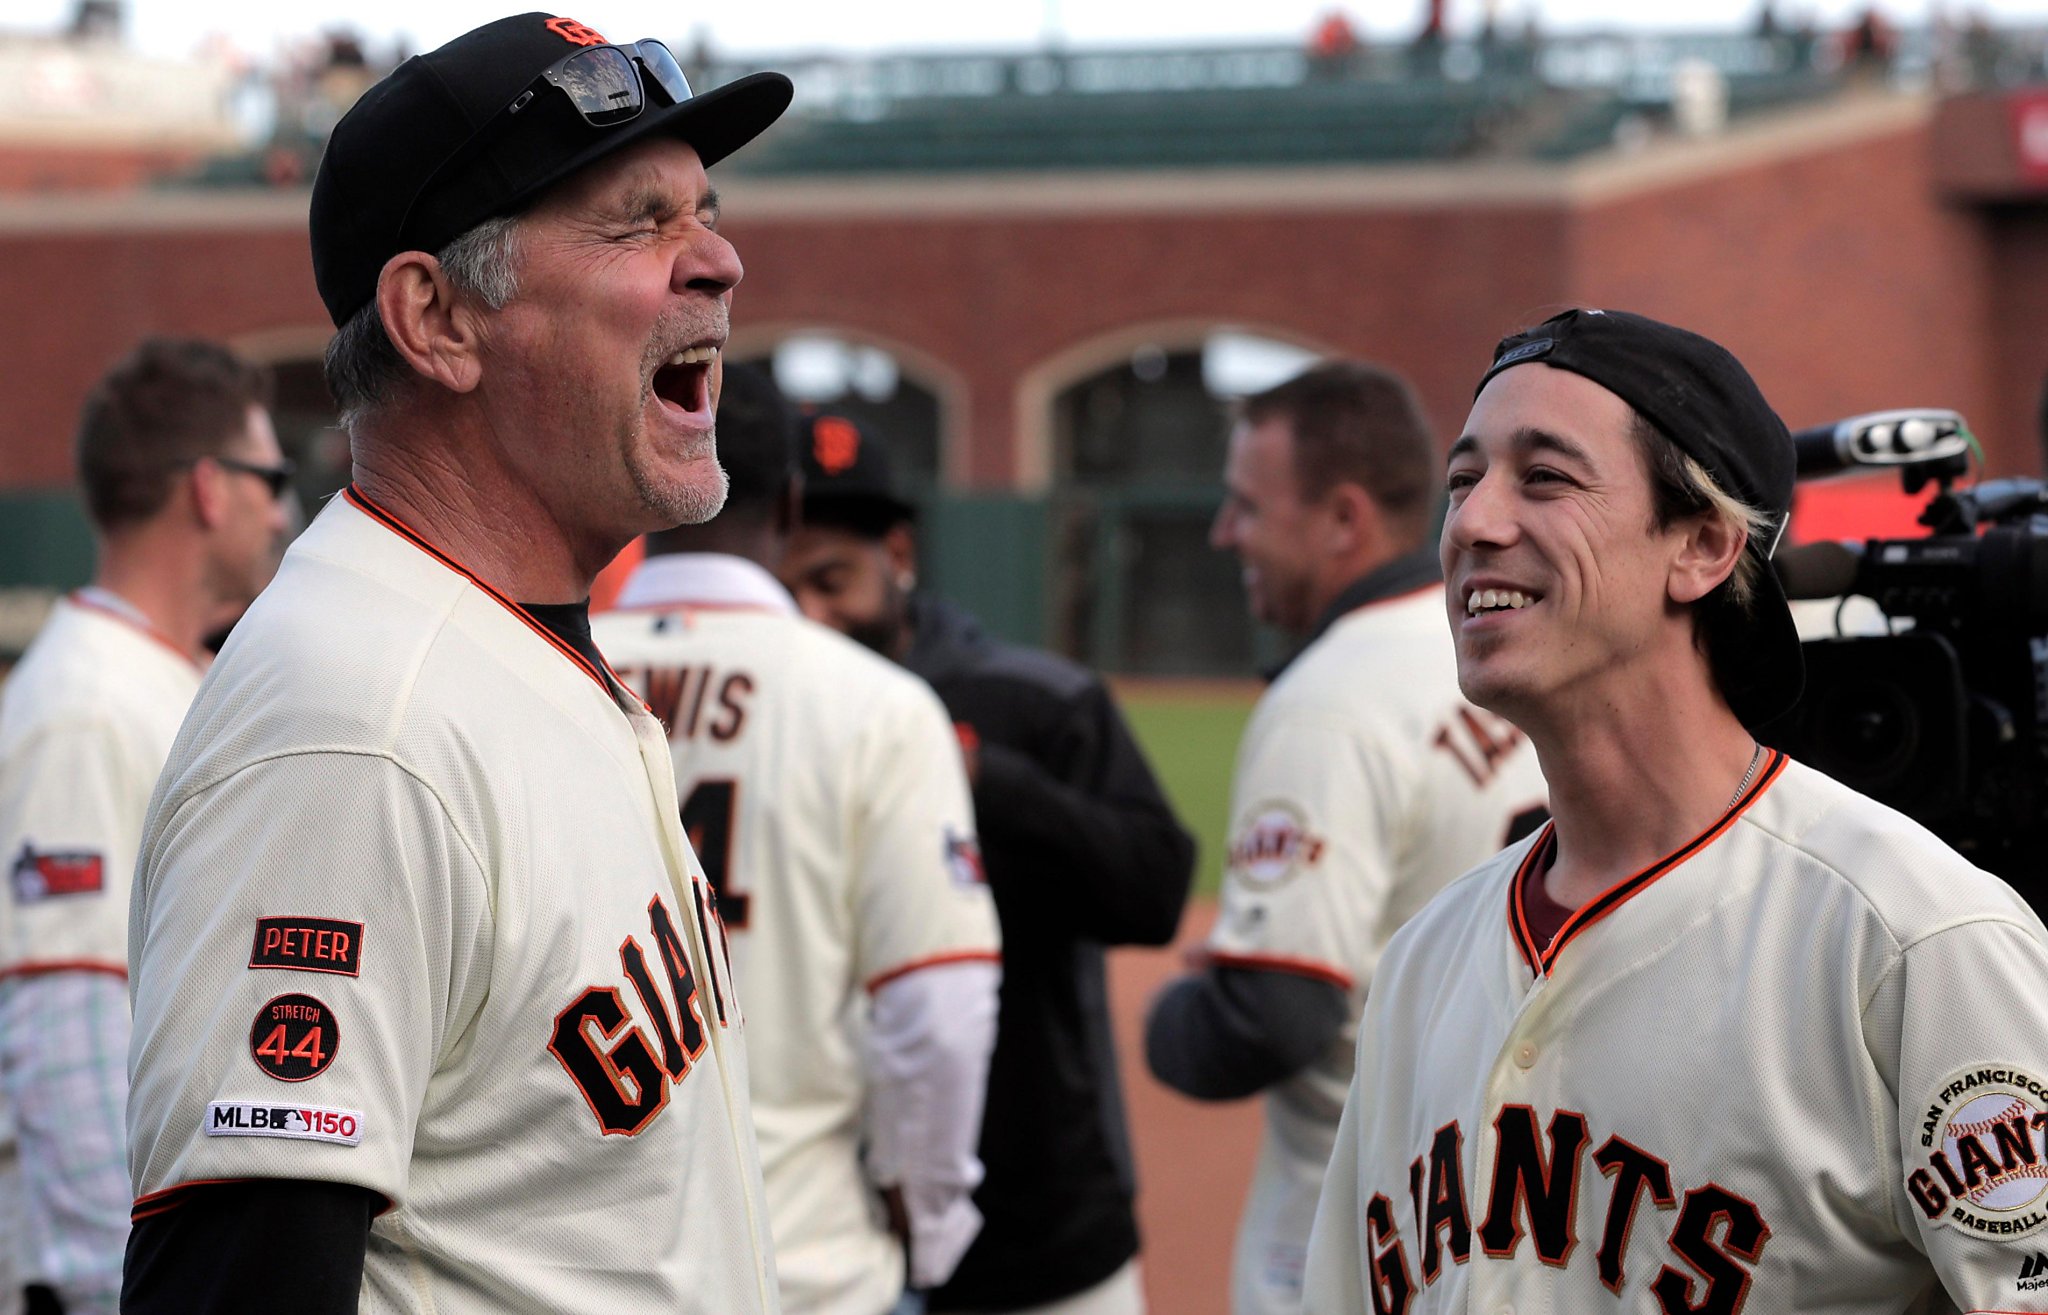 Four years later, Tim Lincecum returns to the Giants to honor